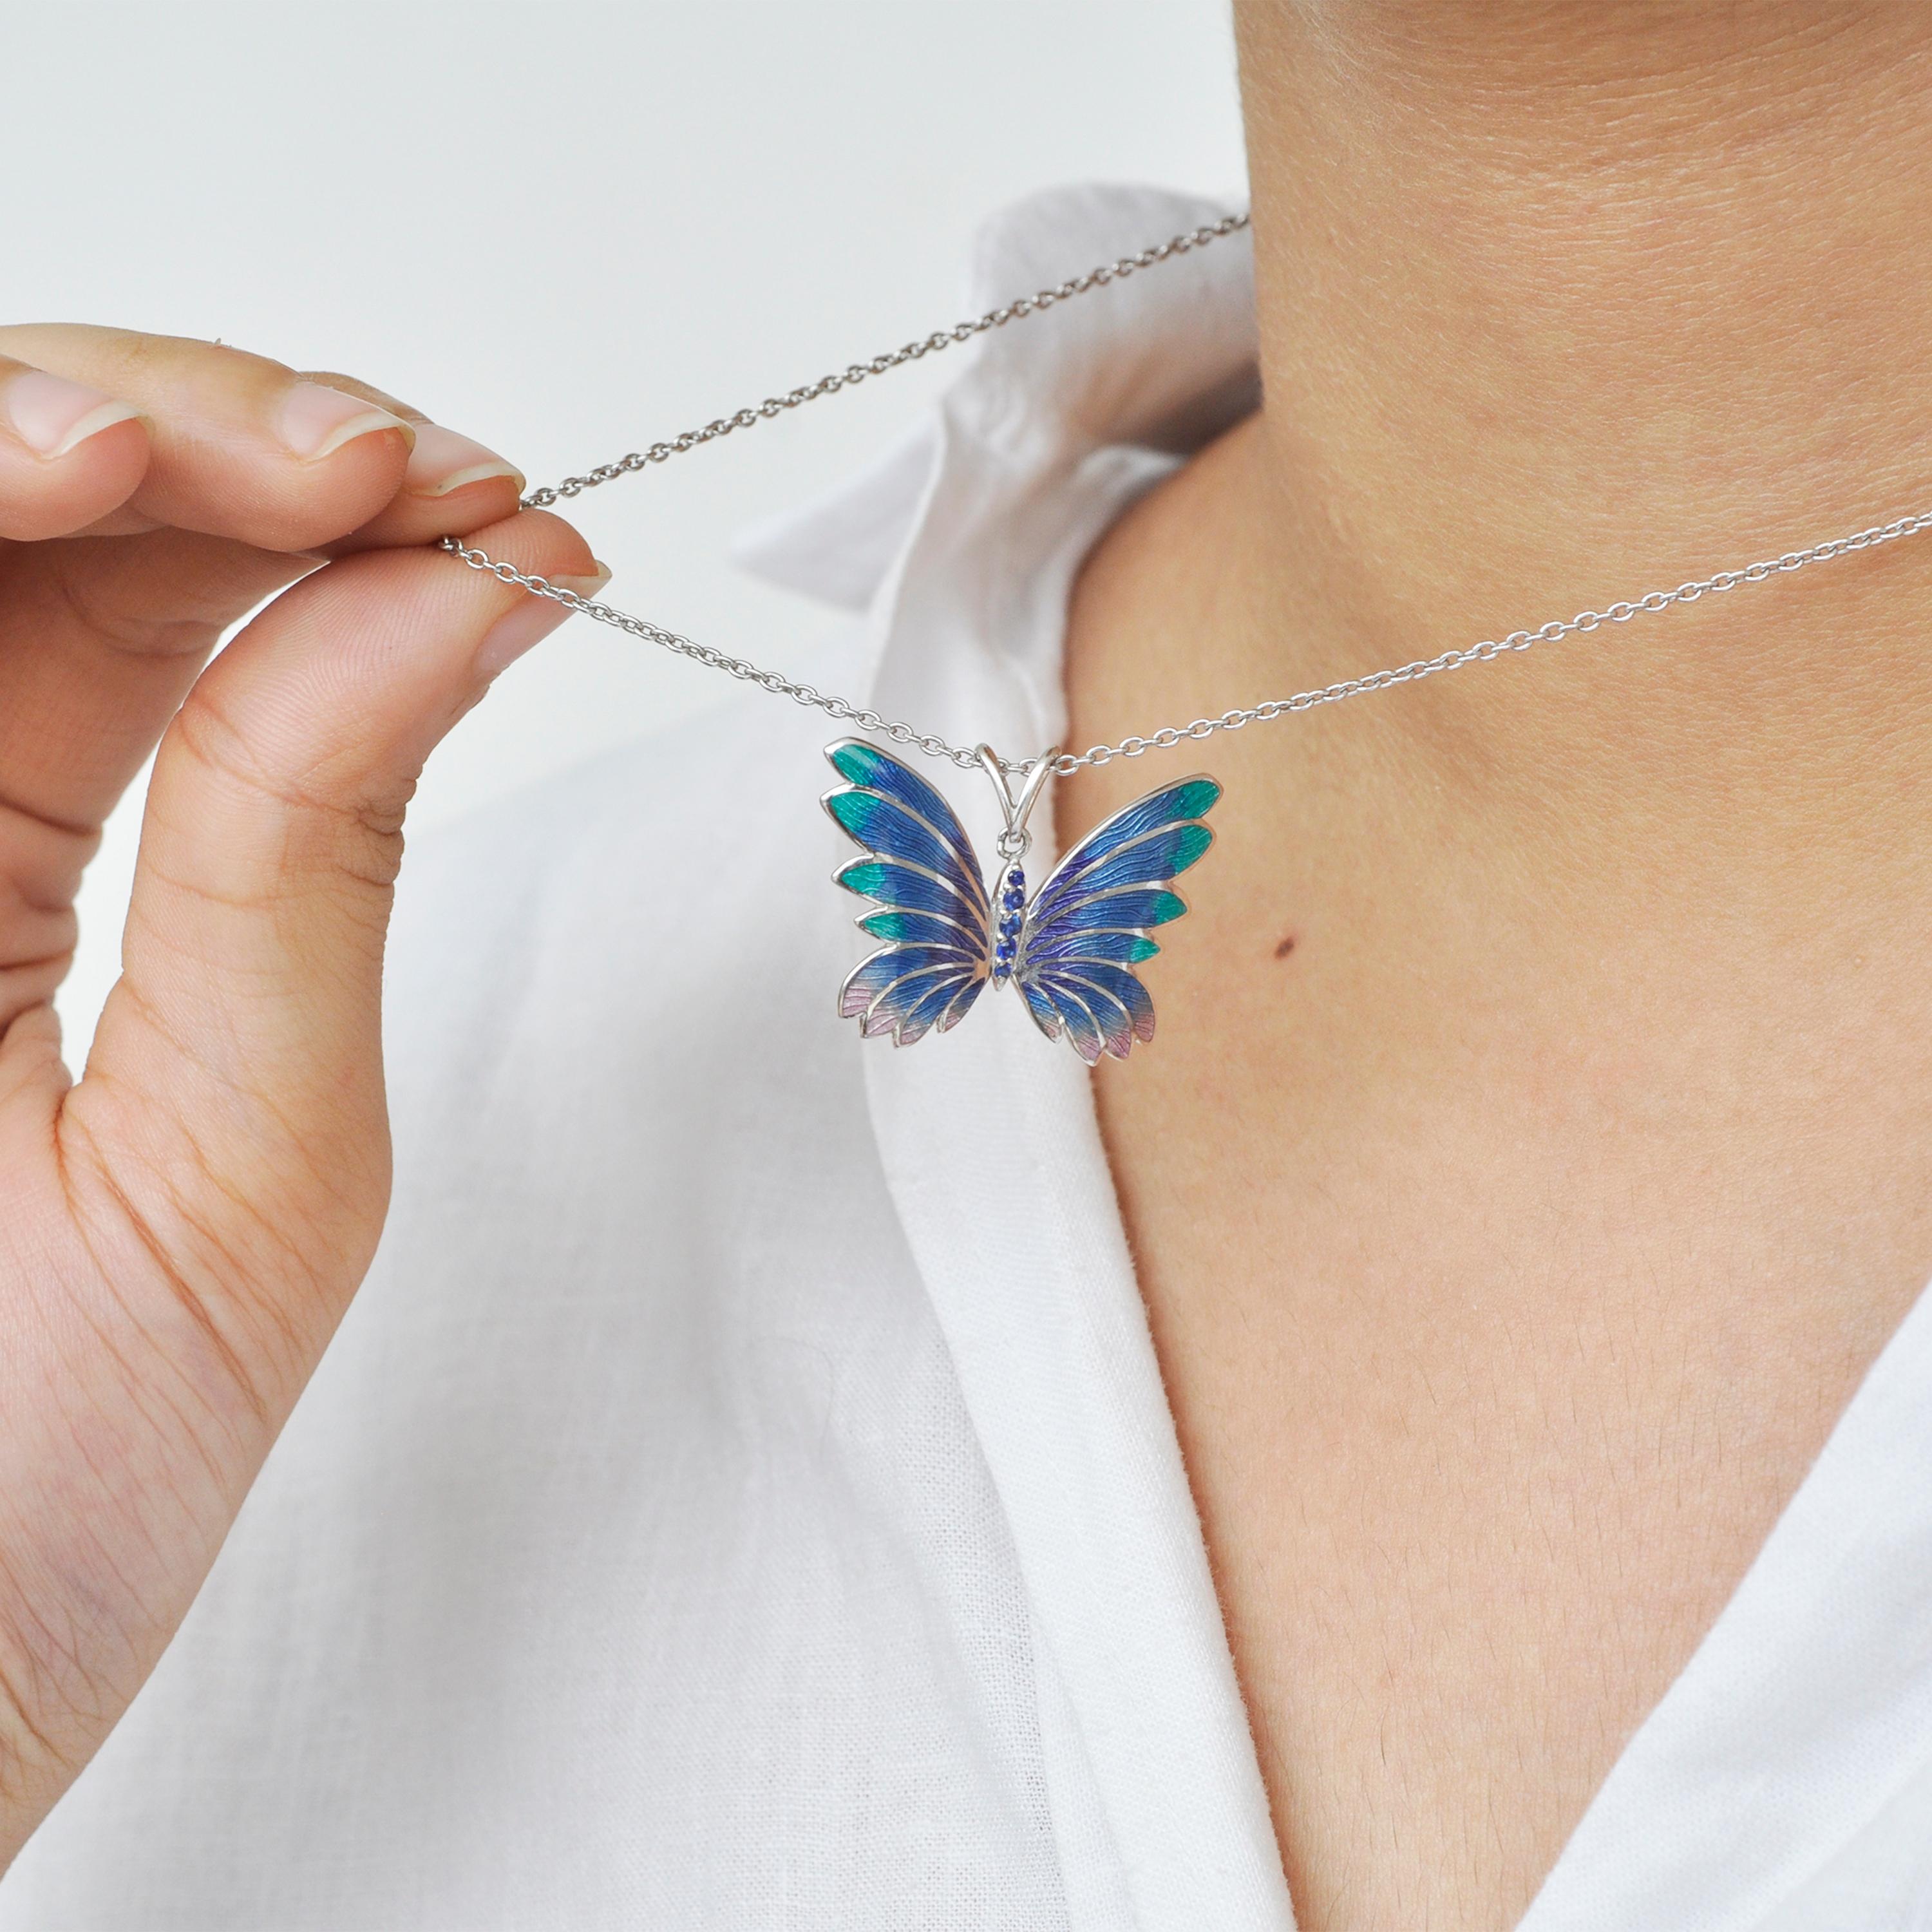 This stunning Sterling Silver Butterfly pendant with shades of Plique-à-Jour enamelling is delicately detailed with five blue lab created sapphires on the body. The pendant has two loops on the upper side which can easily pass a chain through to be